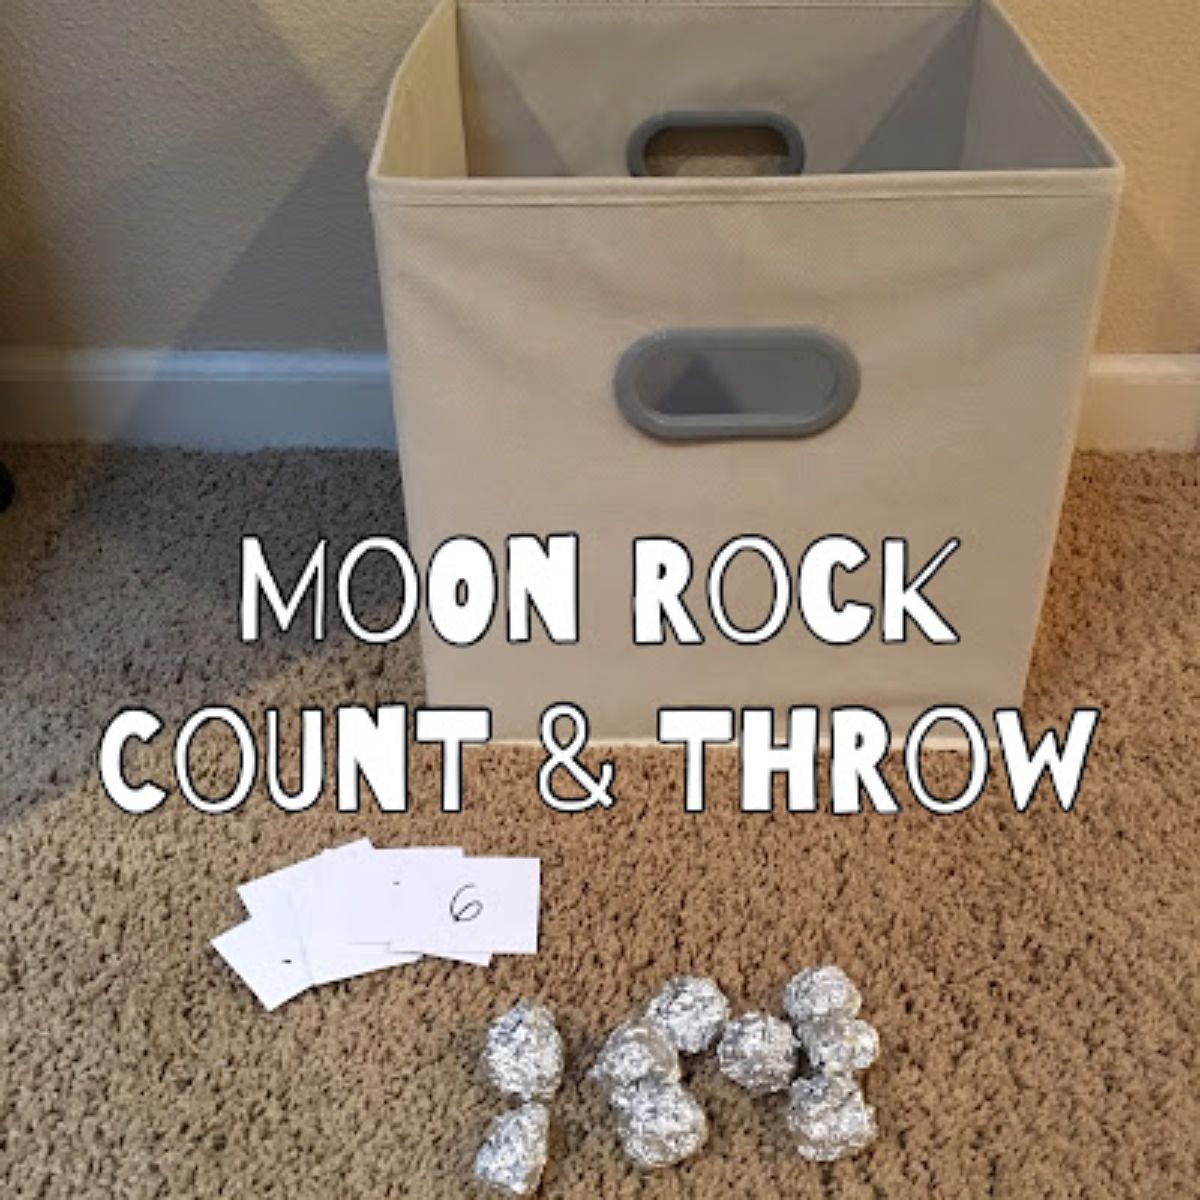 on a camel colored carpet is a begie canvas basket. balls of silver foil are in front of the box with white cards. The text reds "moon rock count and throw"